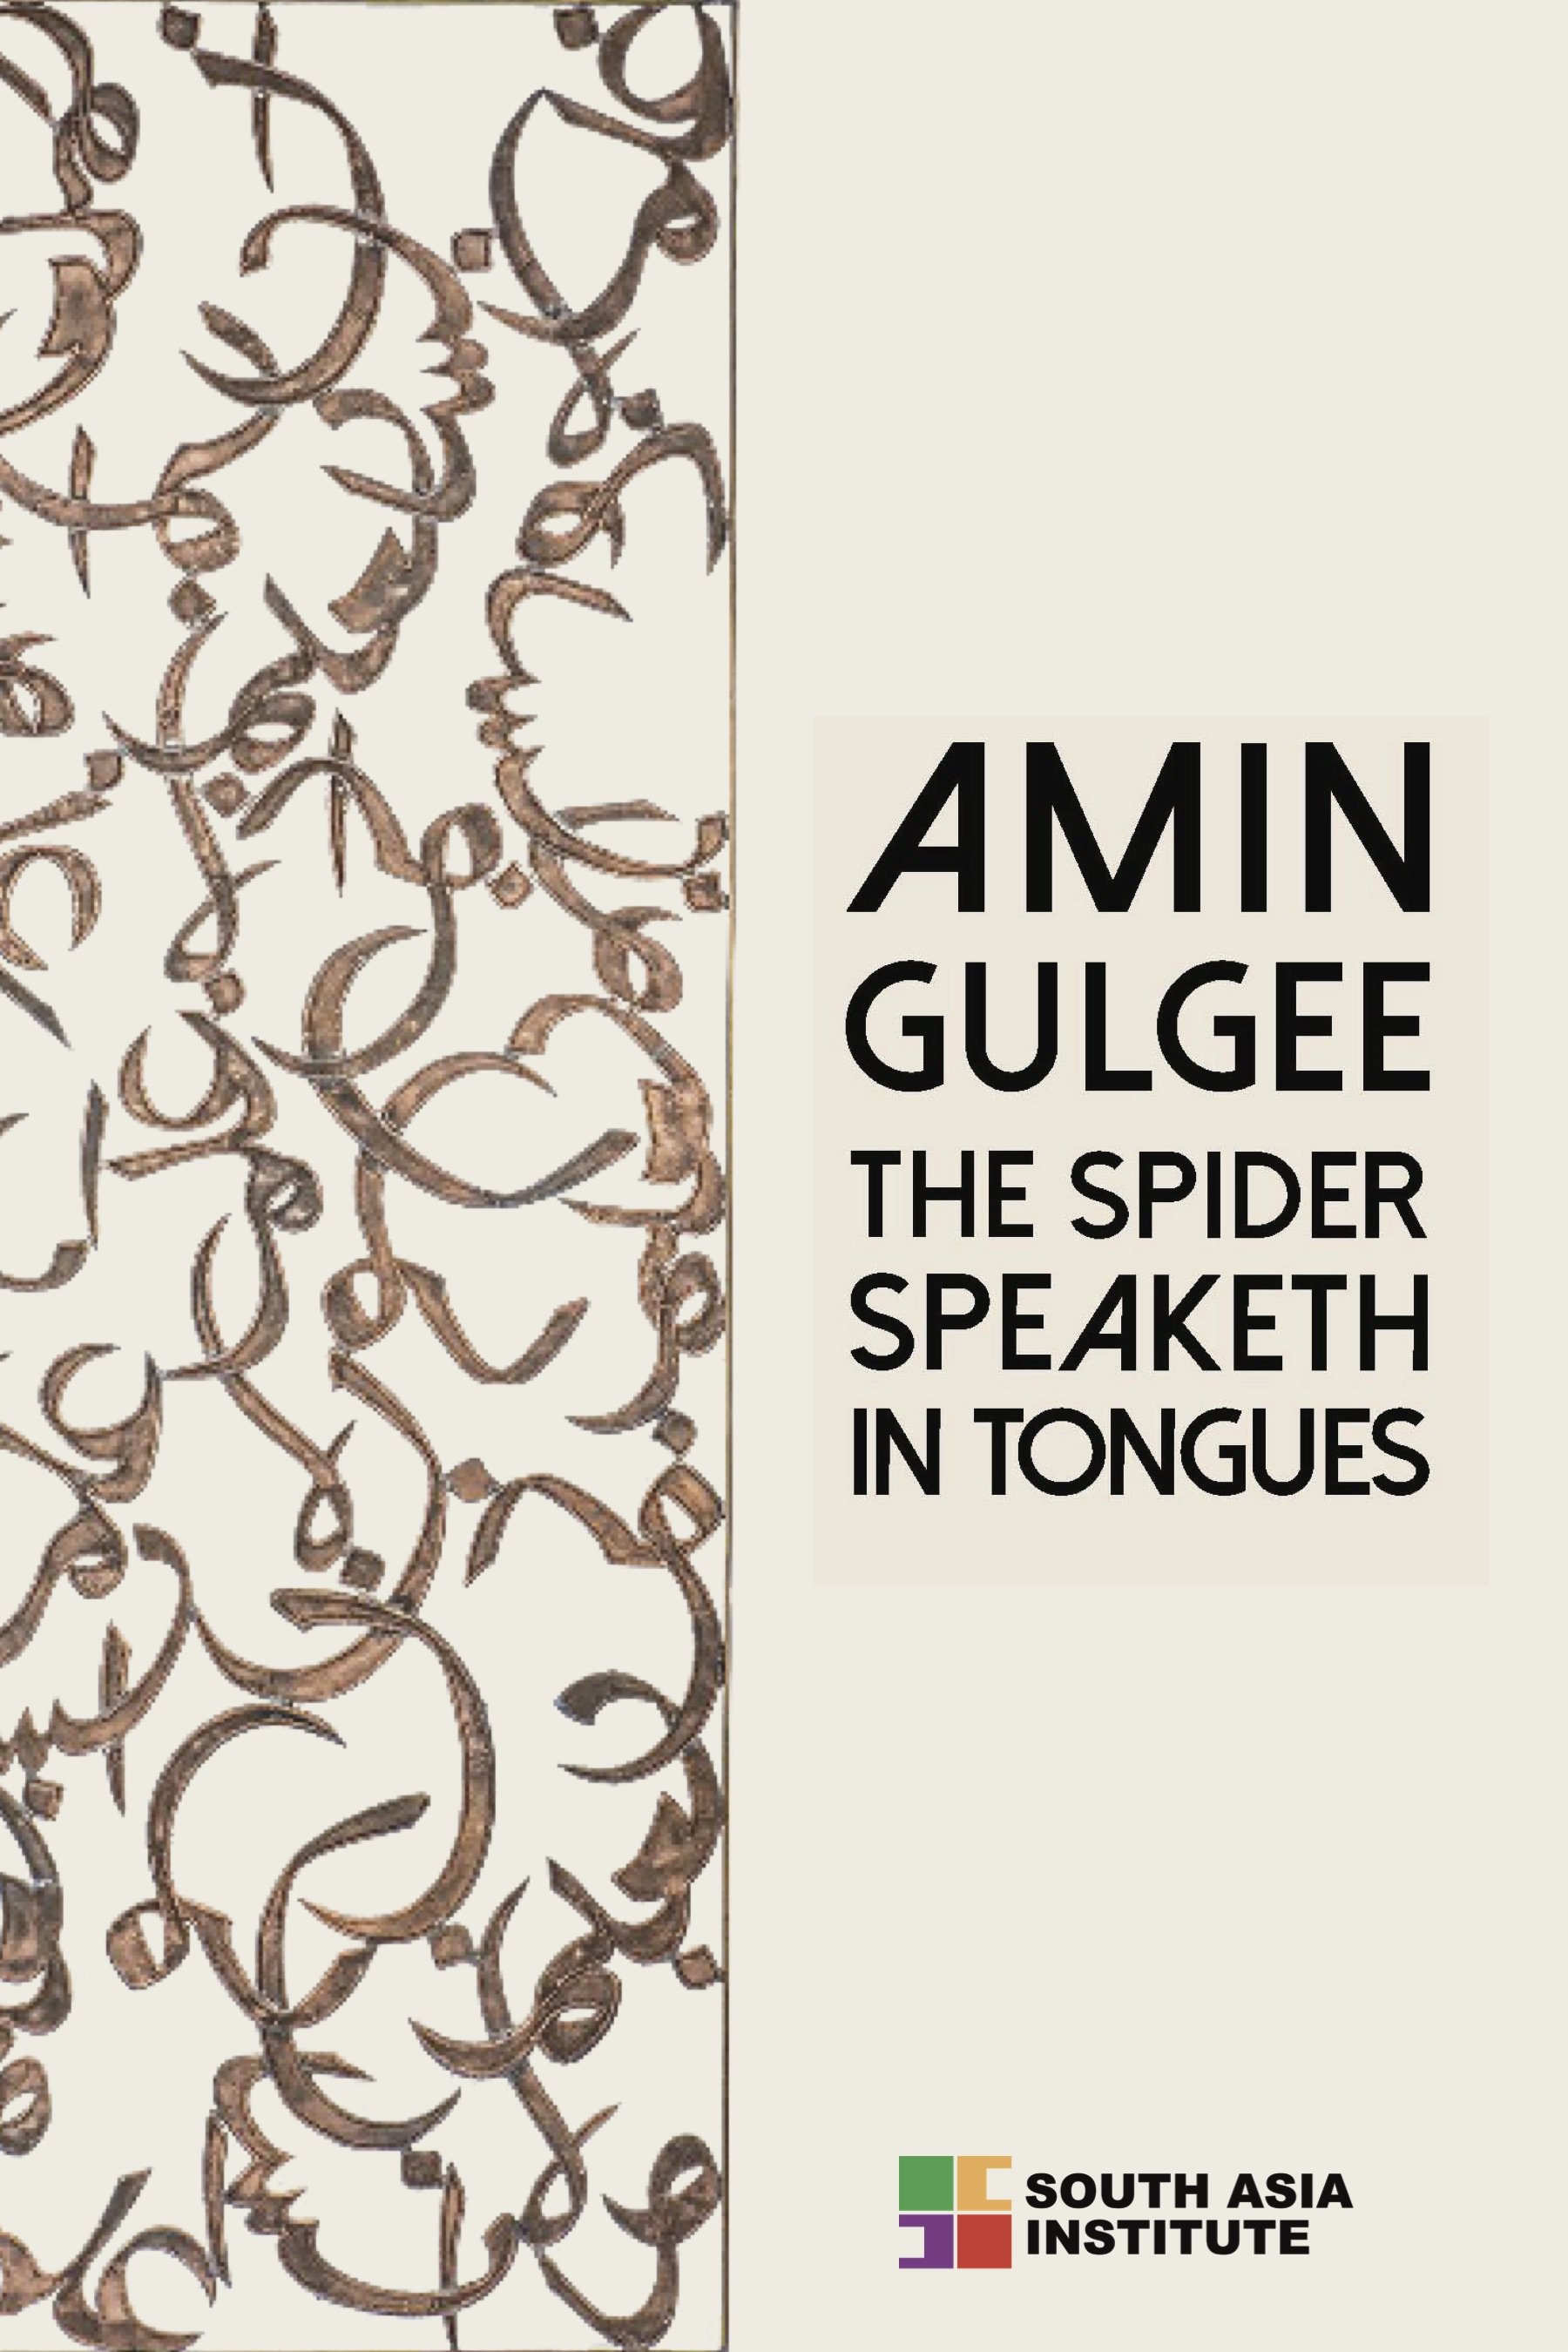 AMIN GULGEE: THE SPIDER SPEAKETH IN TONGUES